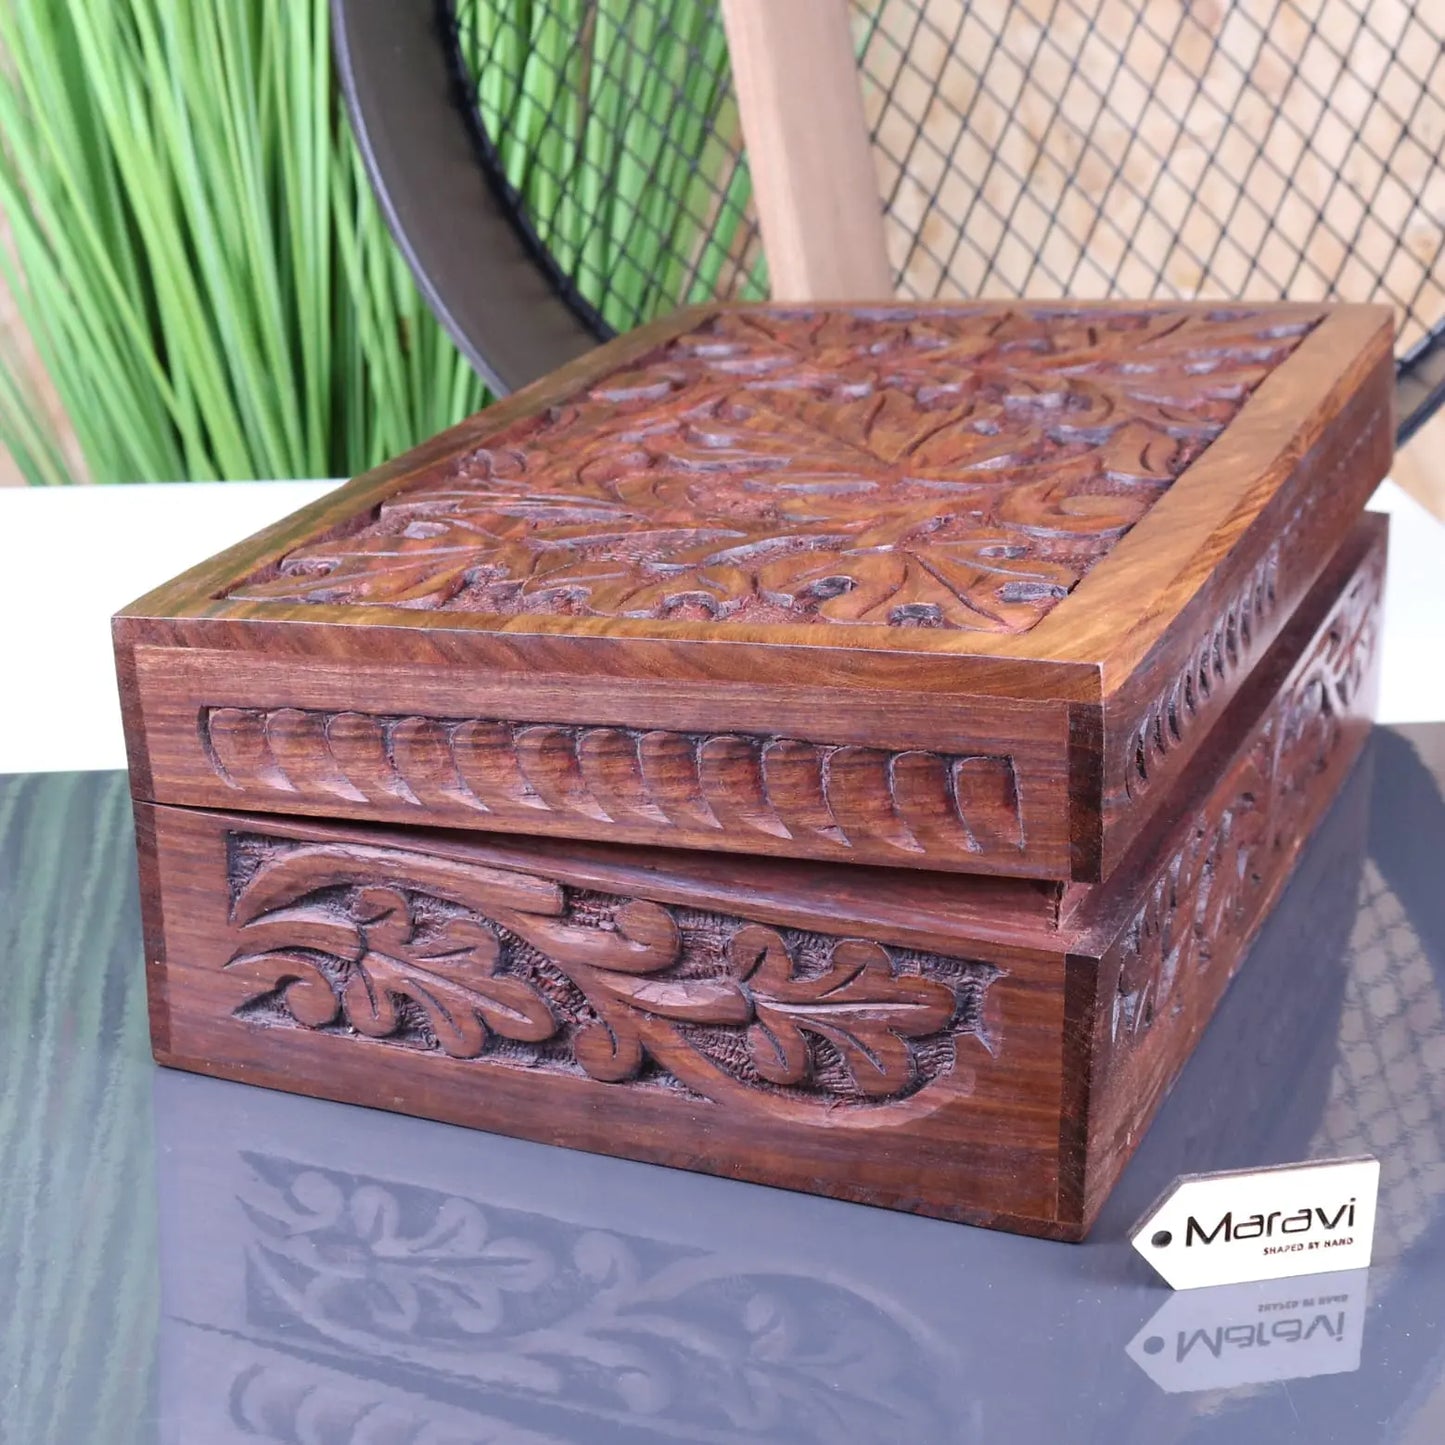 Zopui Large Carved Storage Box - Side View